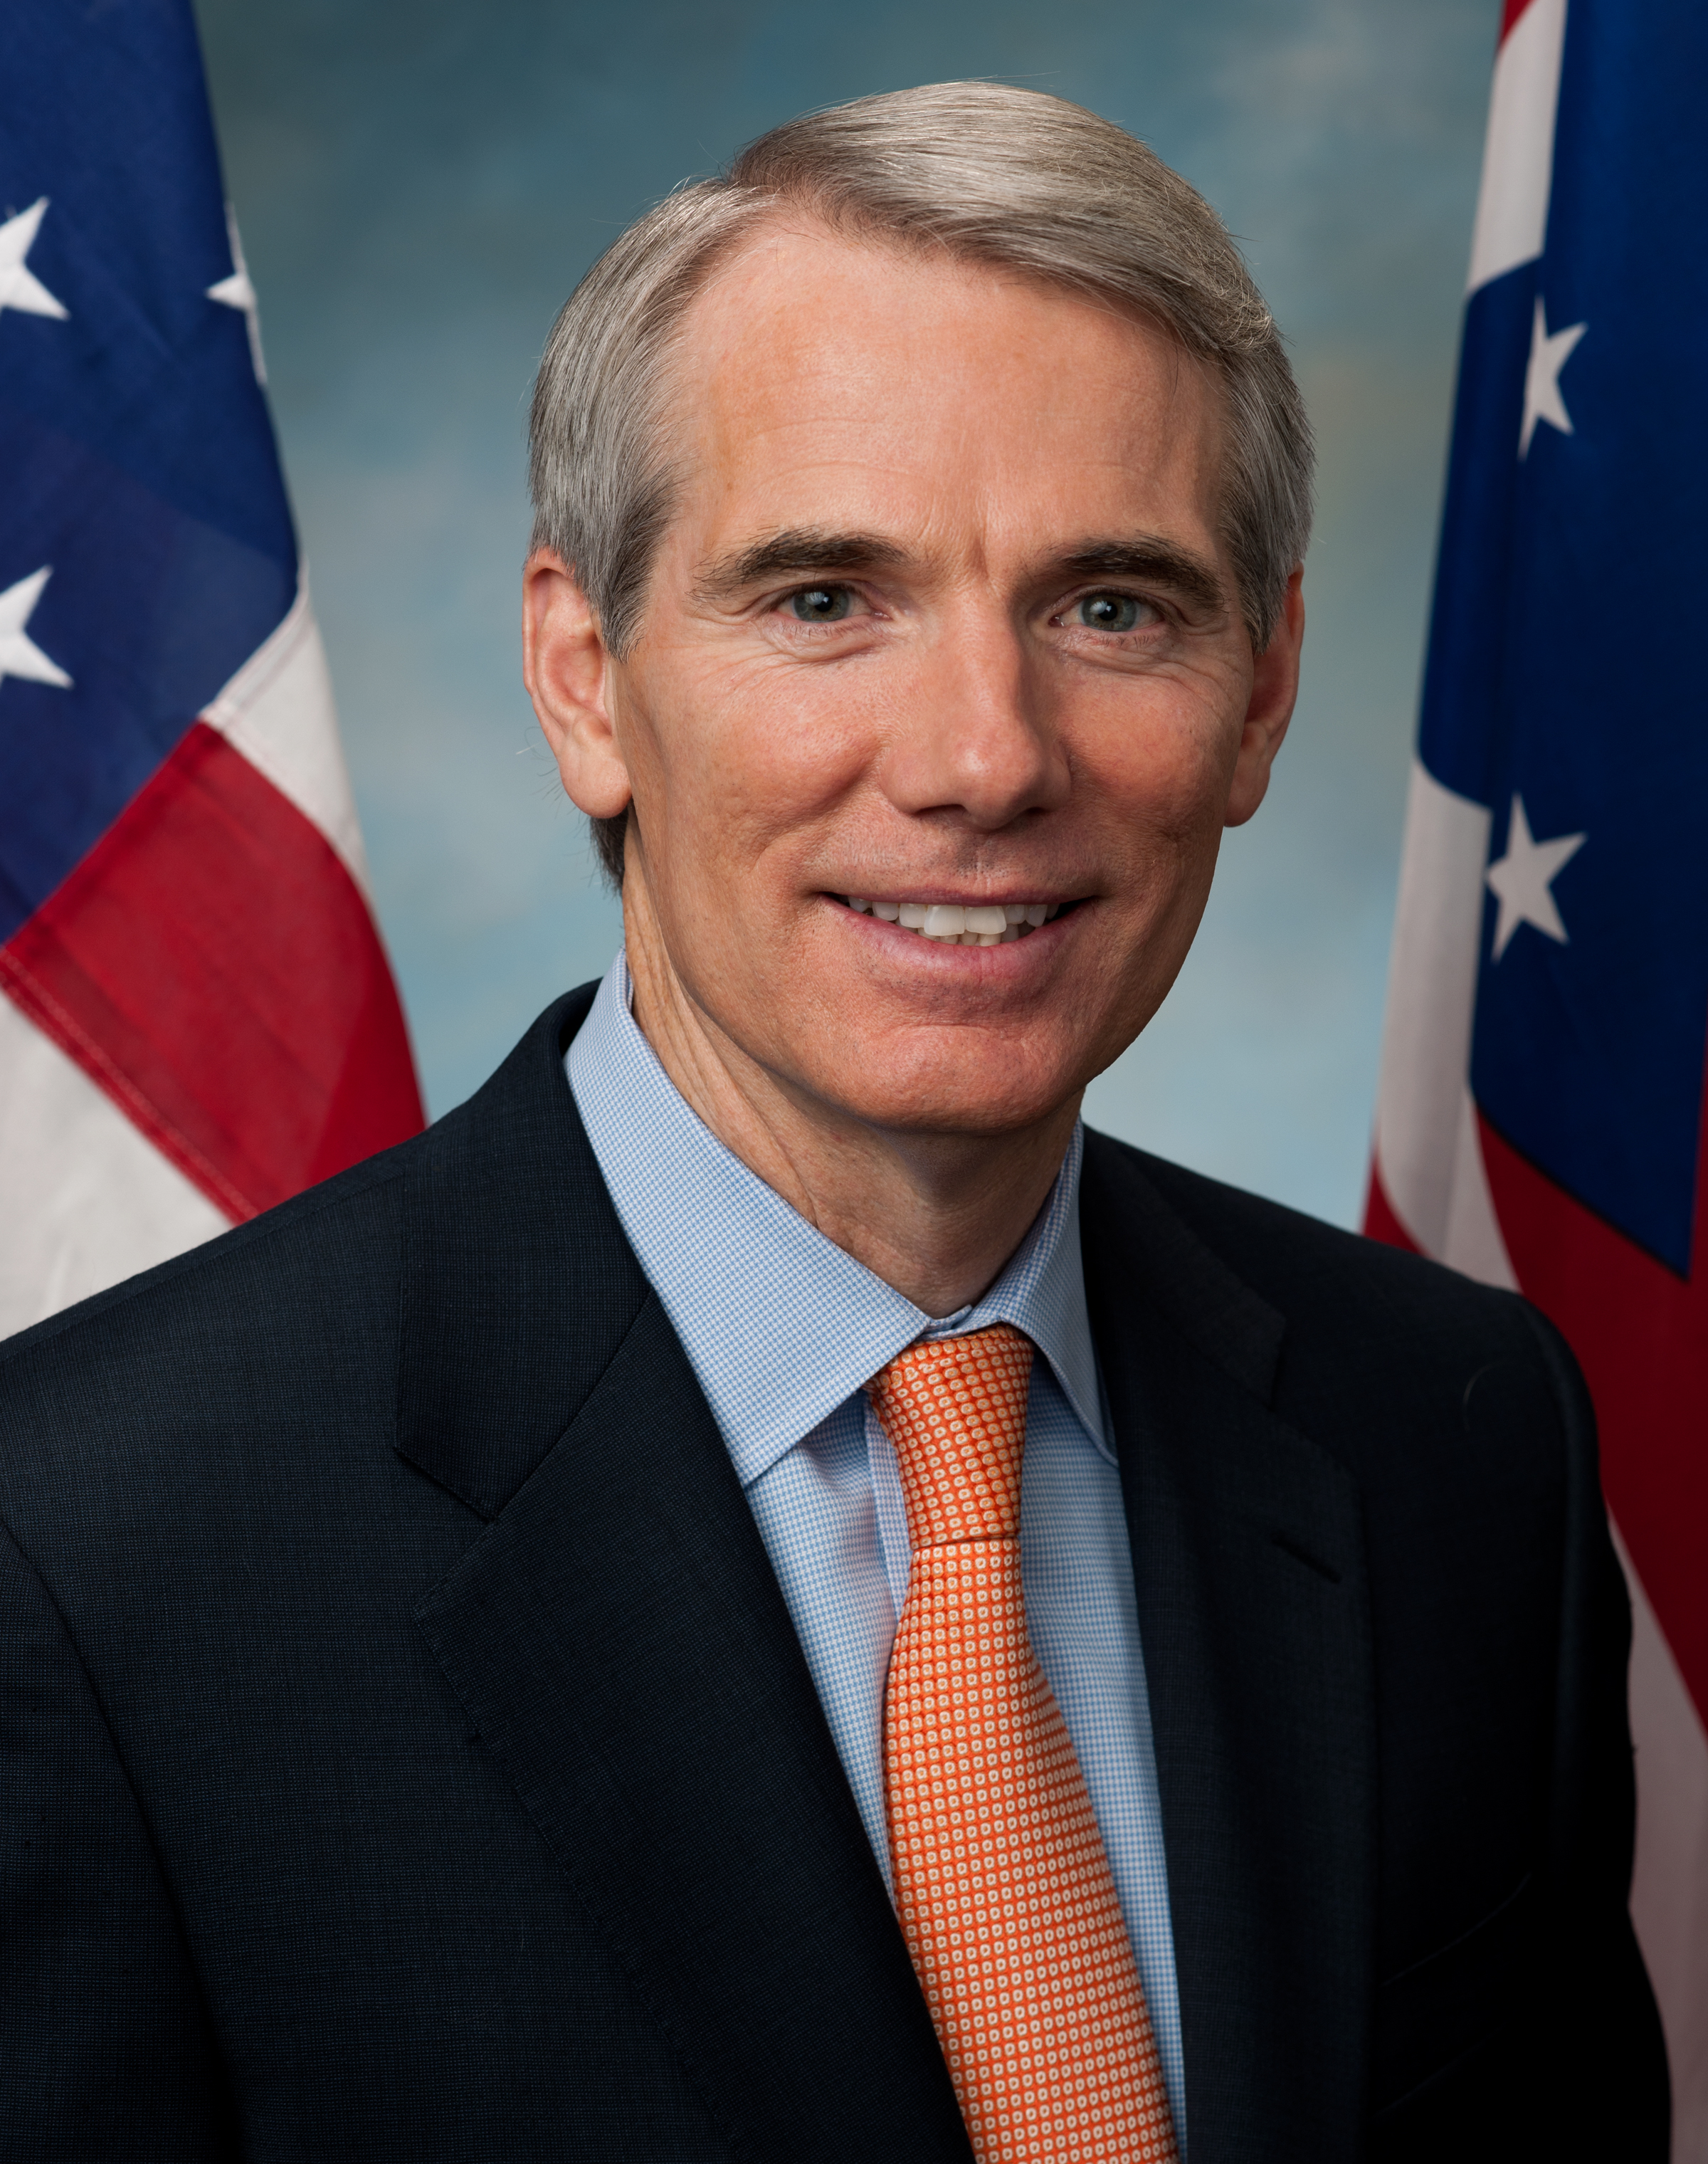 Rob Portman 3rd Director Of The Office Of Management And Budget 2006 2007 2nd United States Trade Representa Rob Portman Human Services Political Views